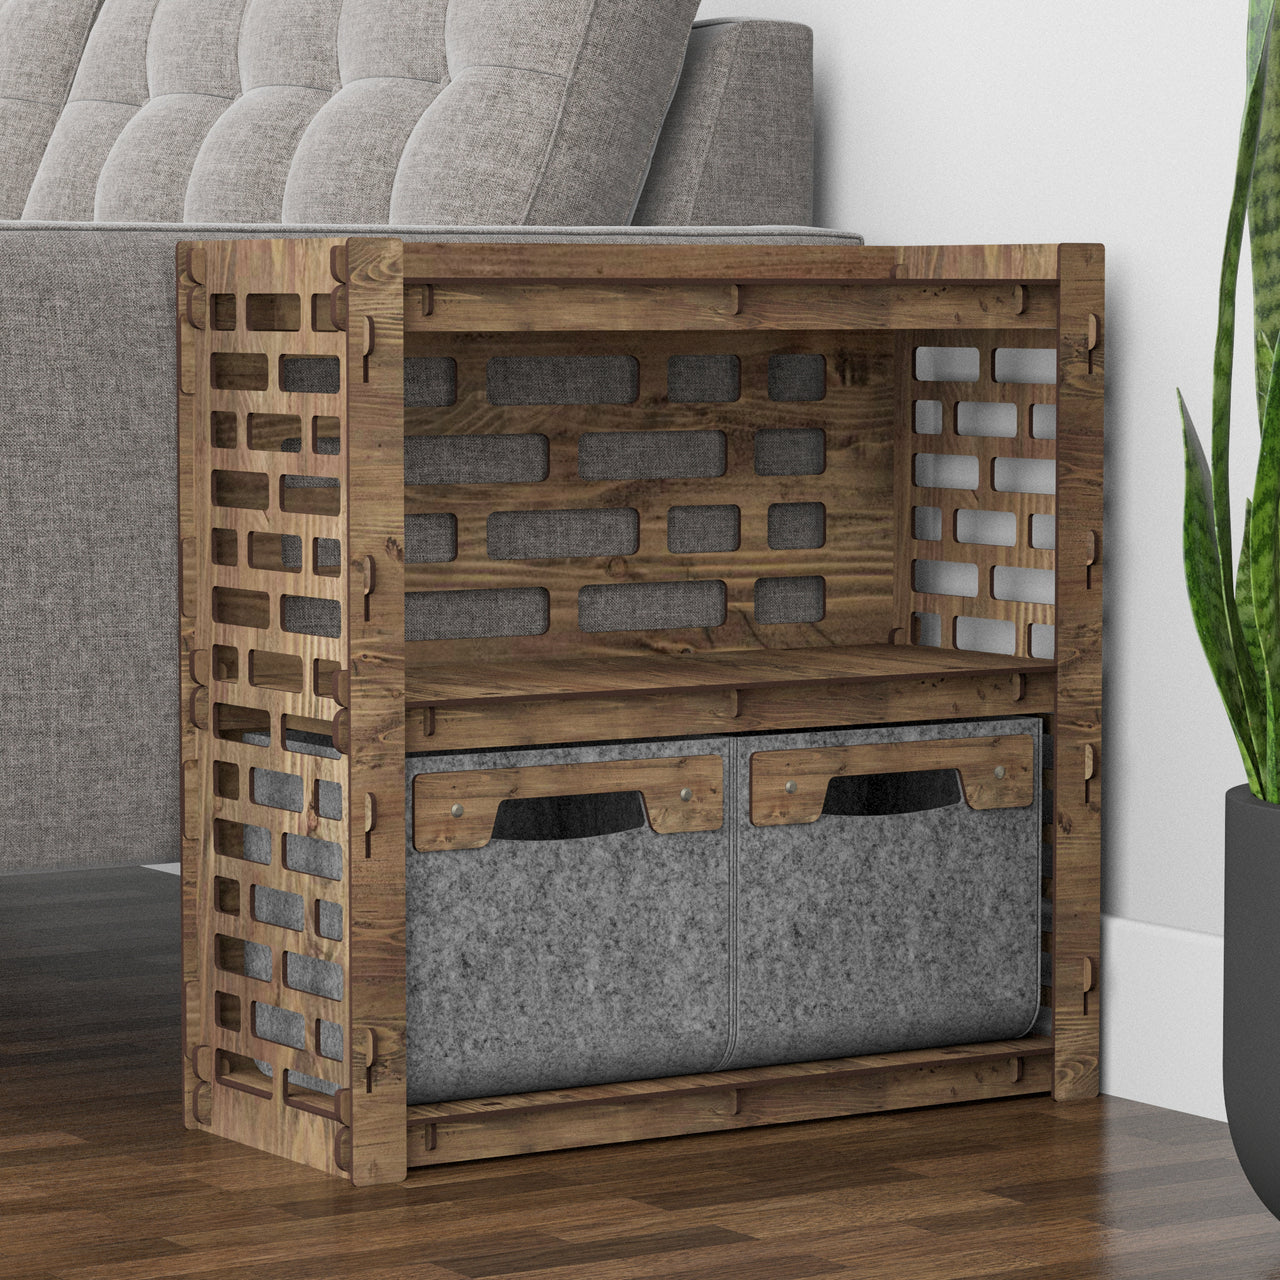 Brickwall Side Table, End Table 2 Drawers [2 SMALL GRAY BINS]